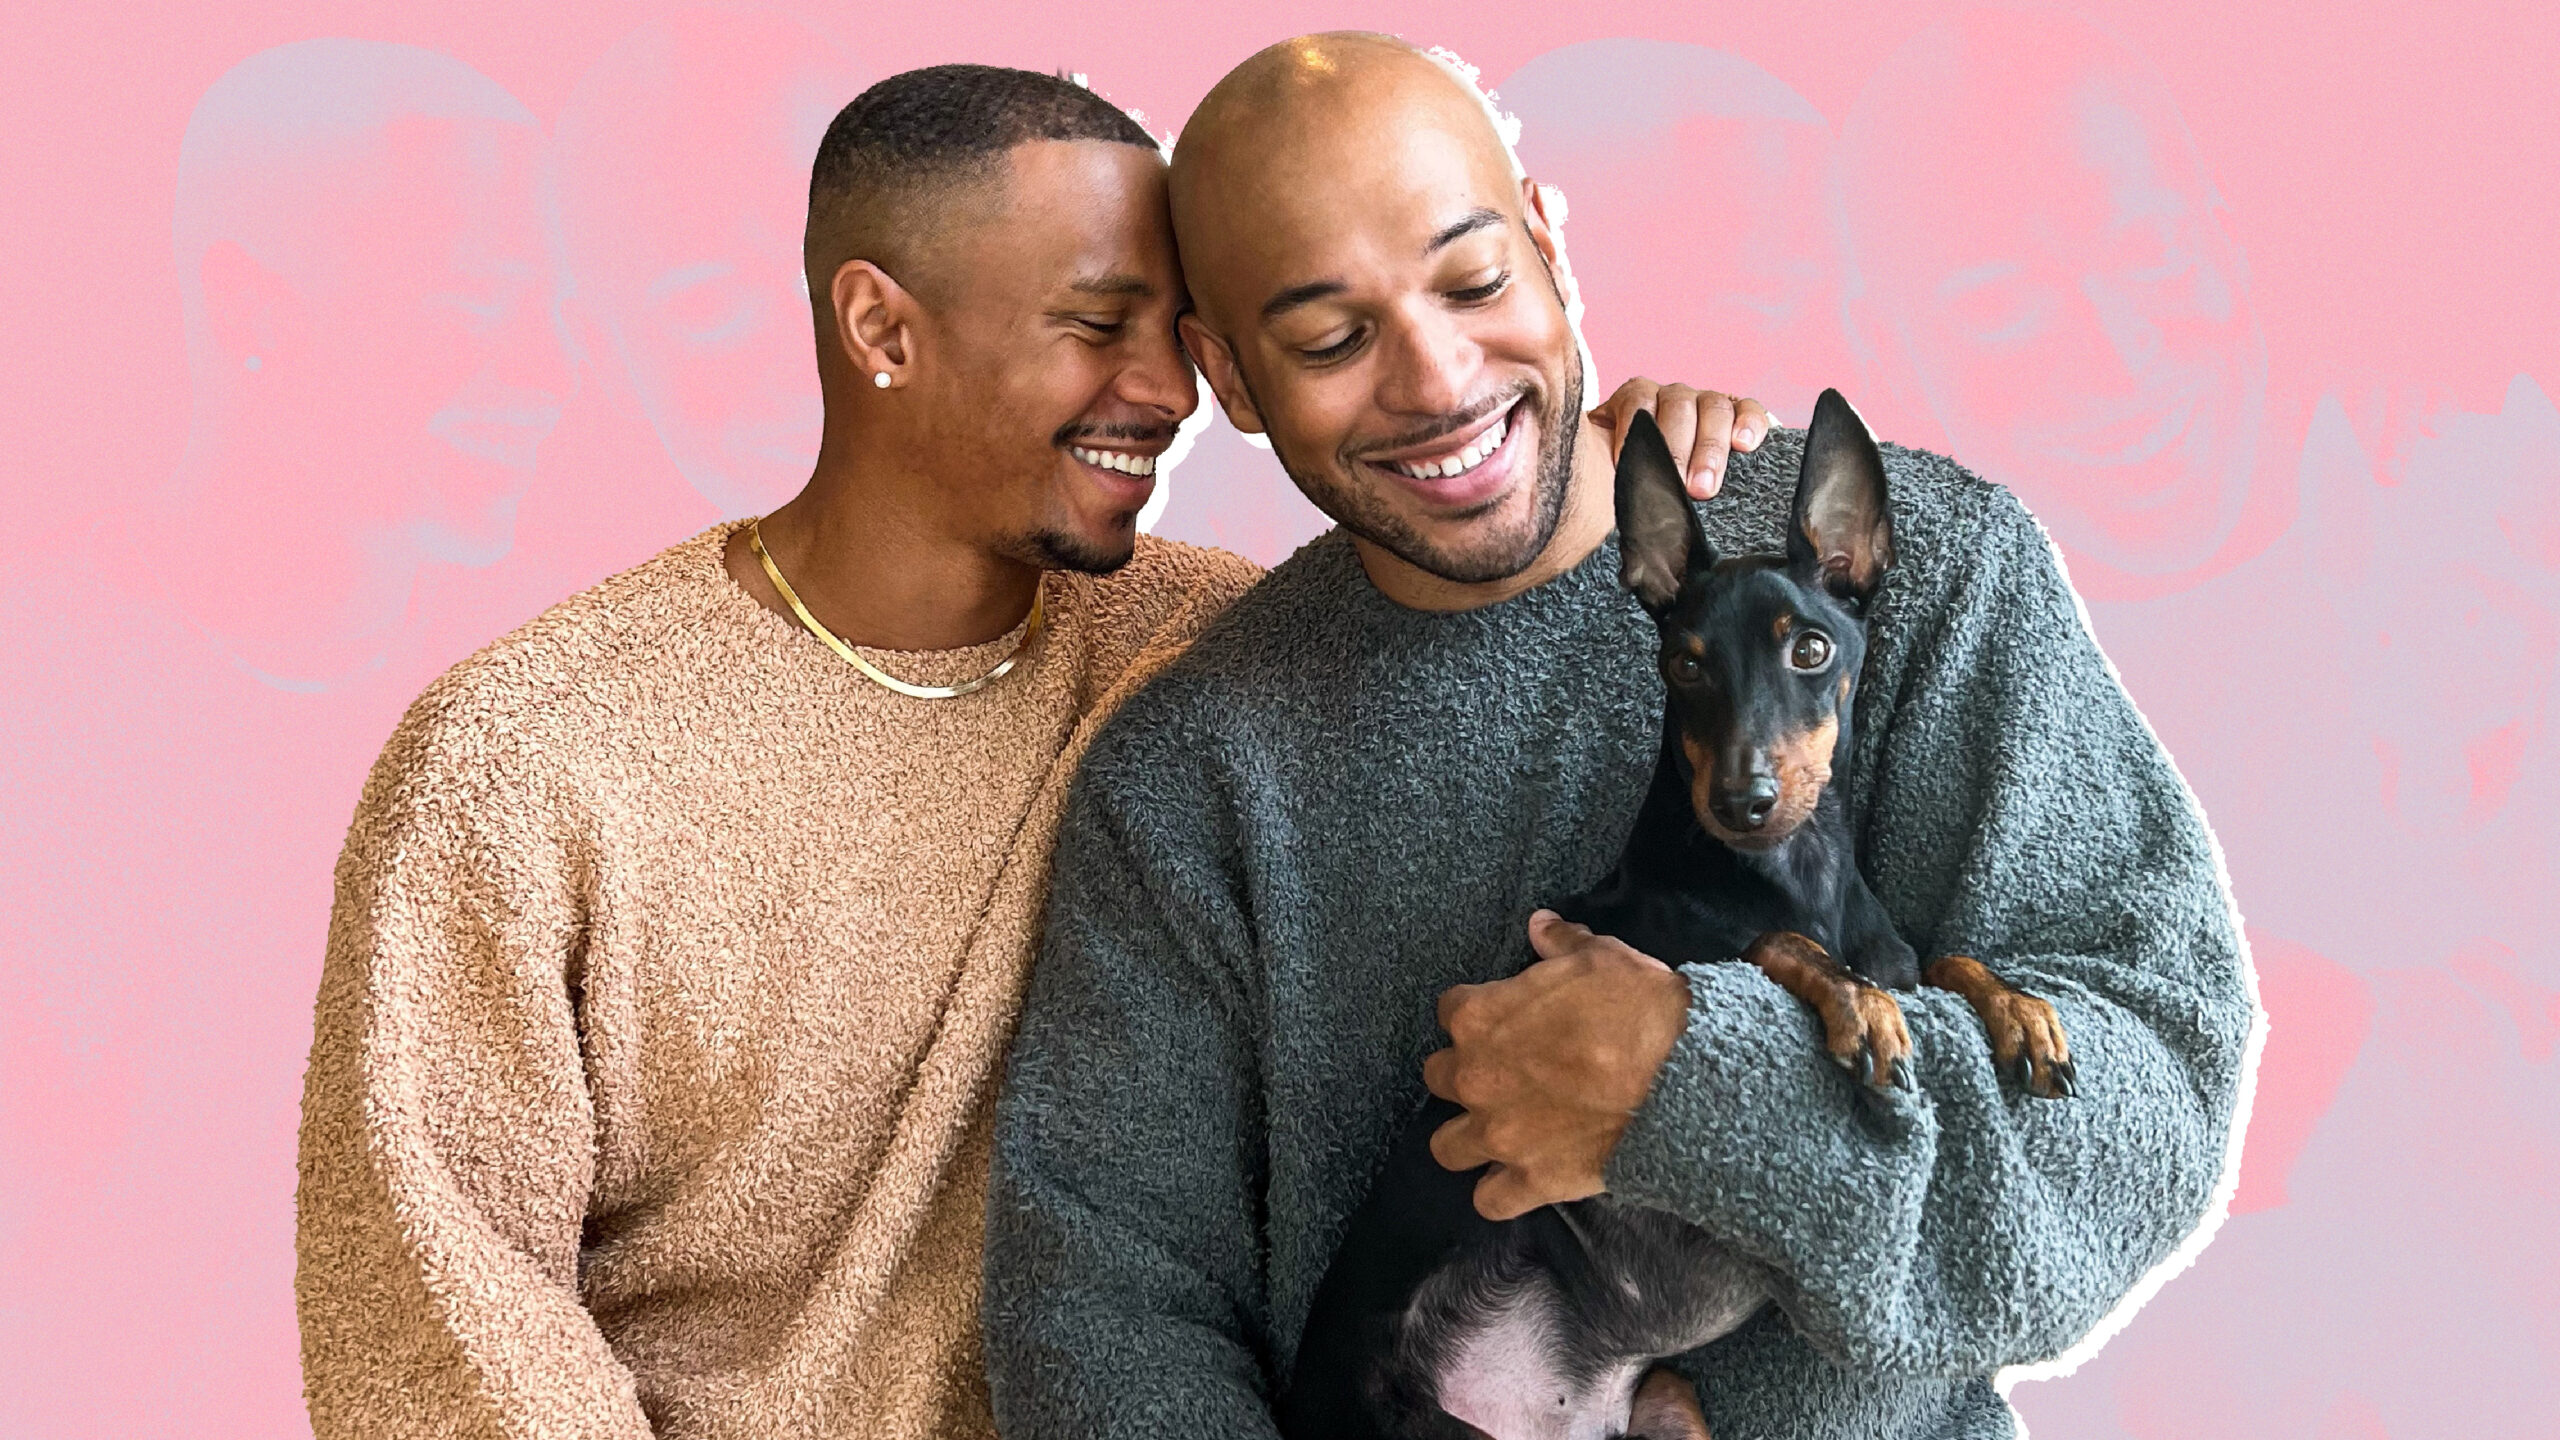 Three Queer Couples Share Their Love Story